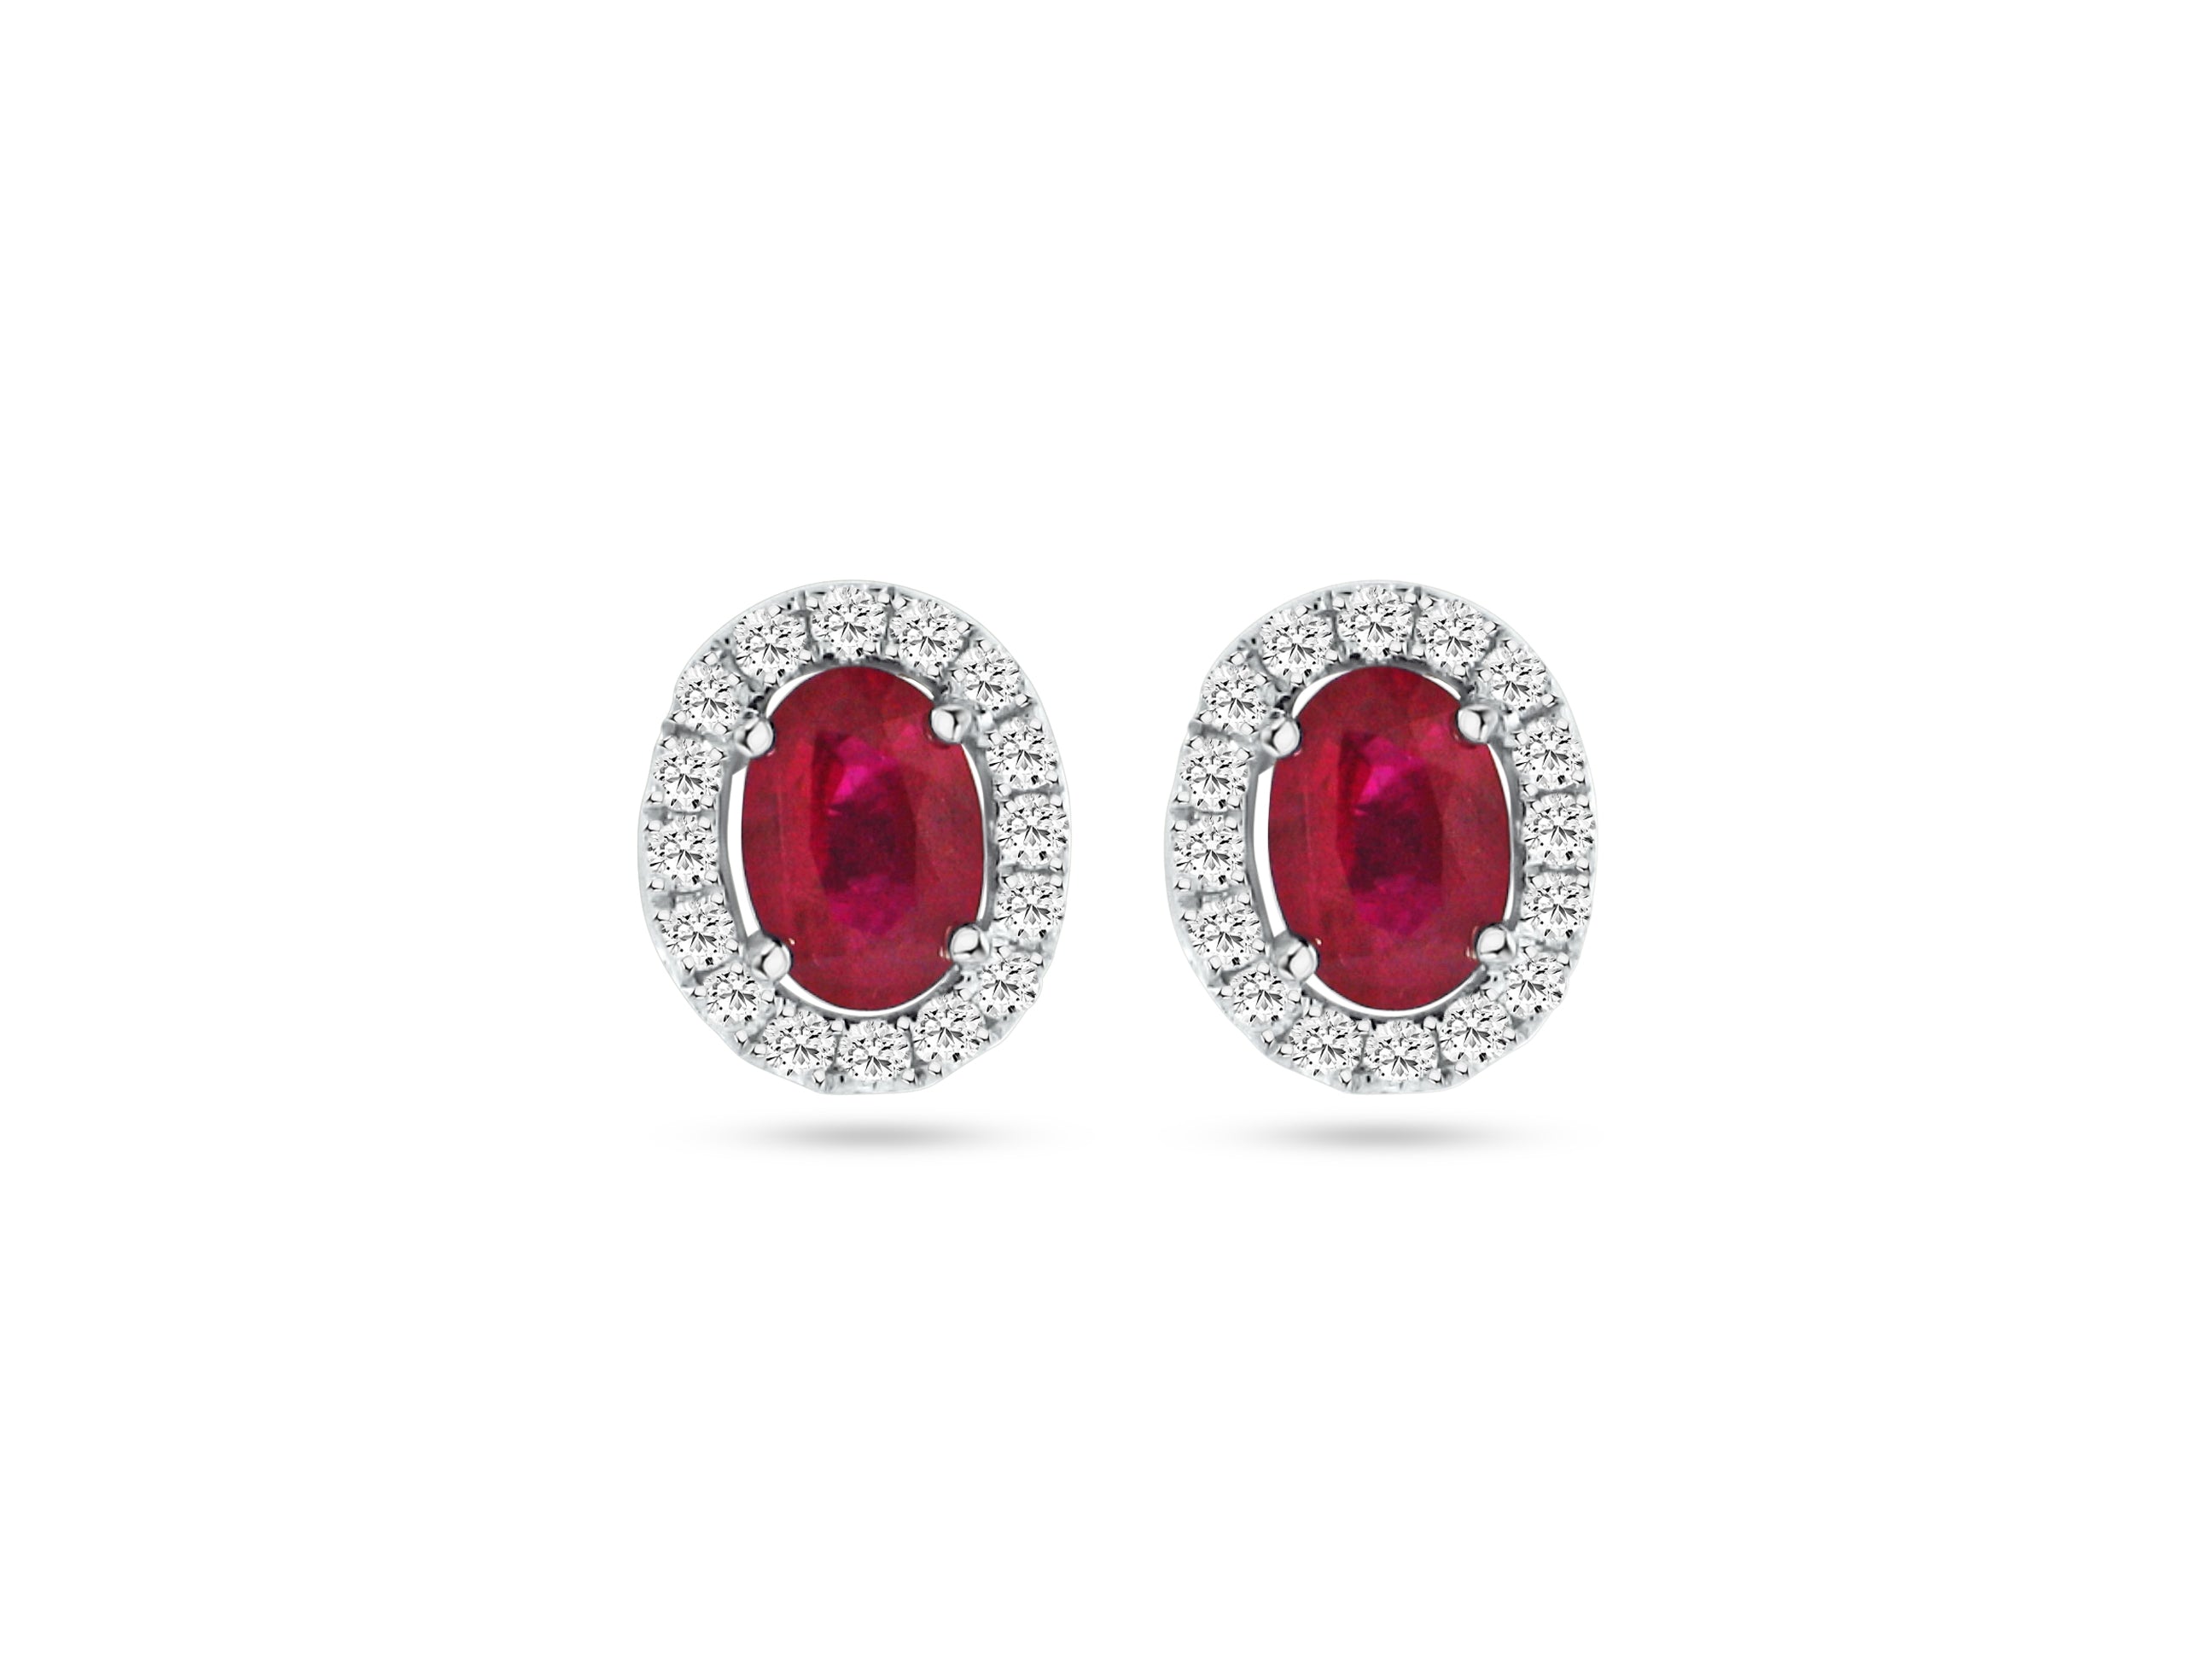 MULLOYS PRIVE 18K WHITE GOLD 1.47CT TOTAL  RUBY A+ AND .46CT TOTAL WEIGHT VS CLARITY G COLOR DIAMOND OVAL STUD EARRINGS